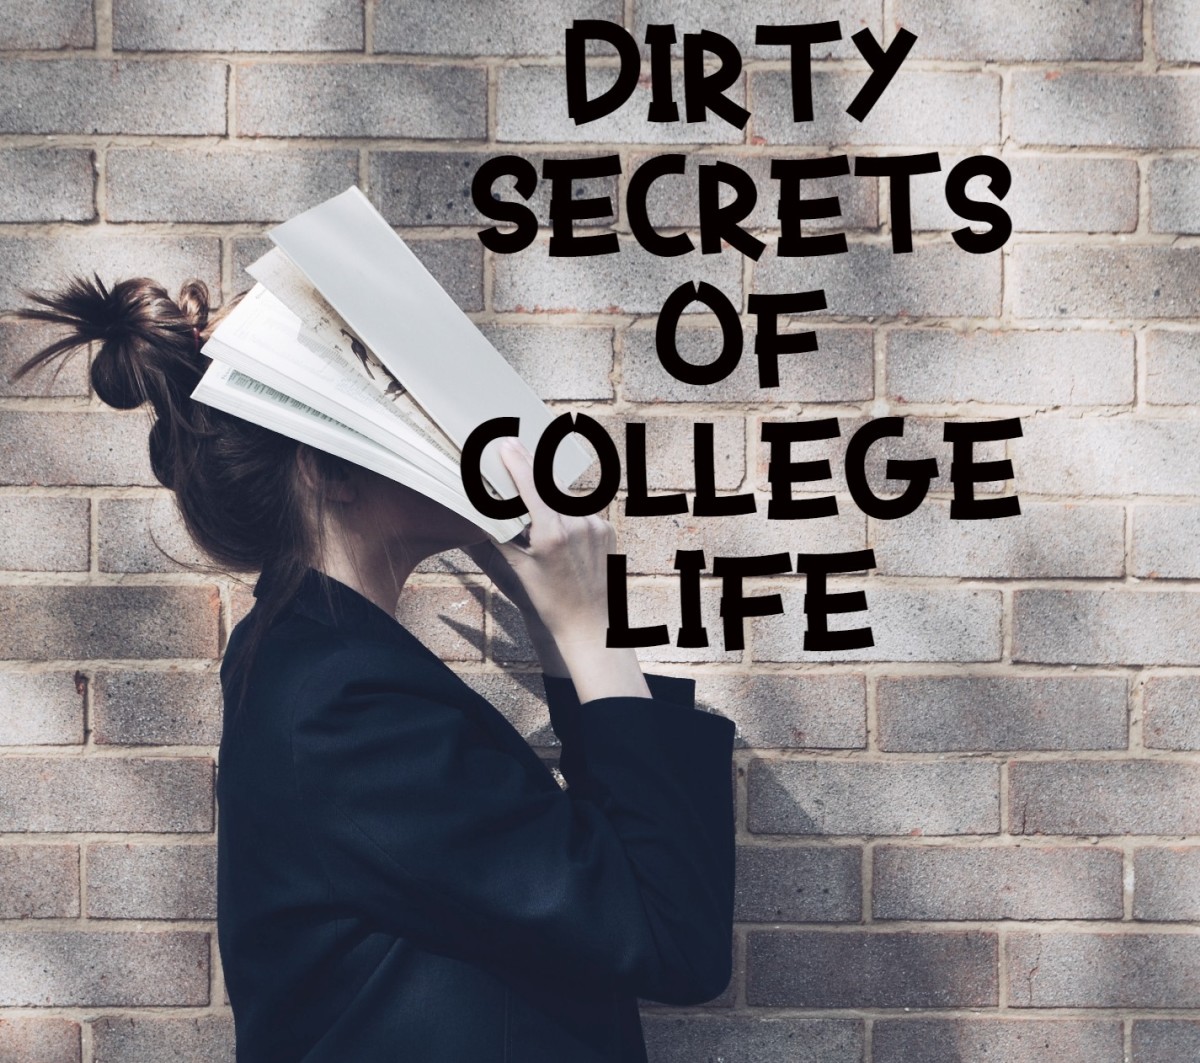 8 Dirty Secrets of College Life